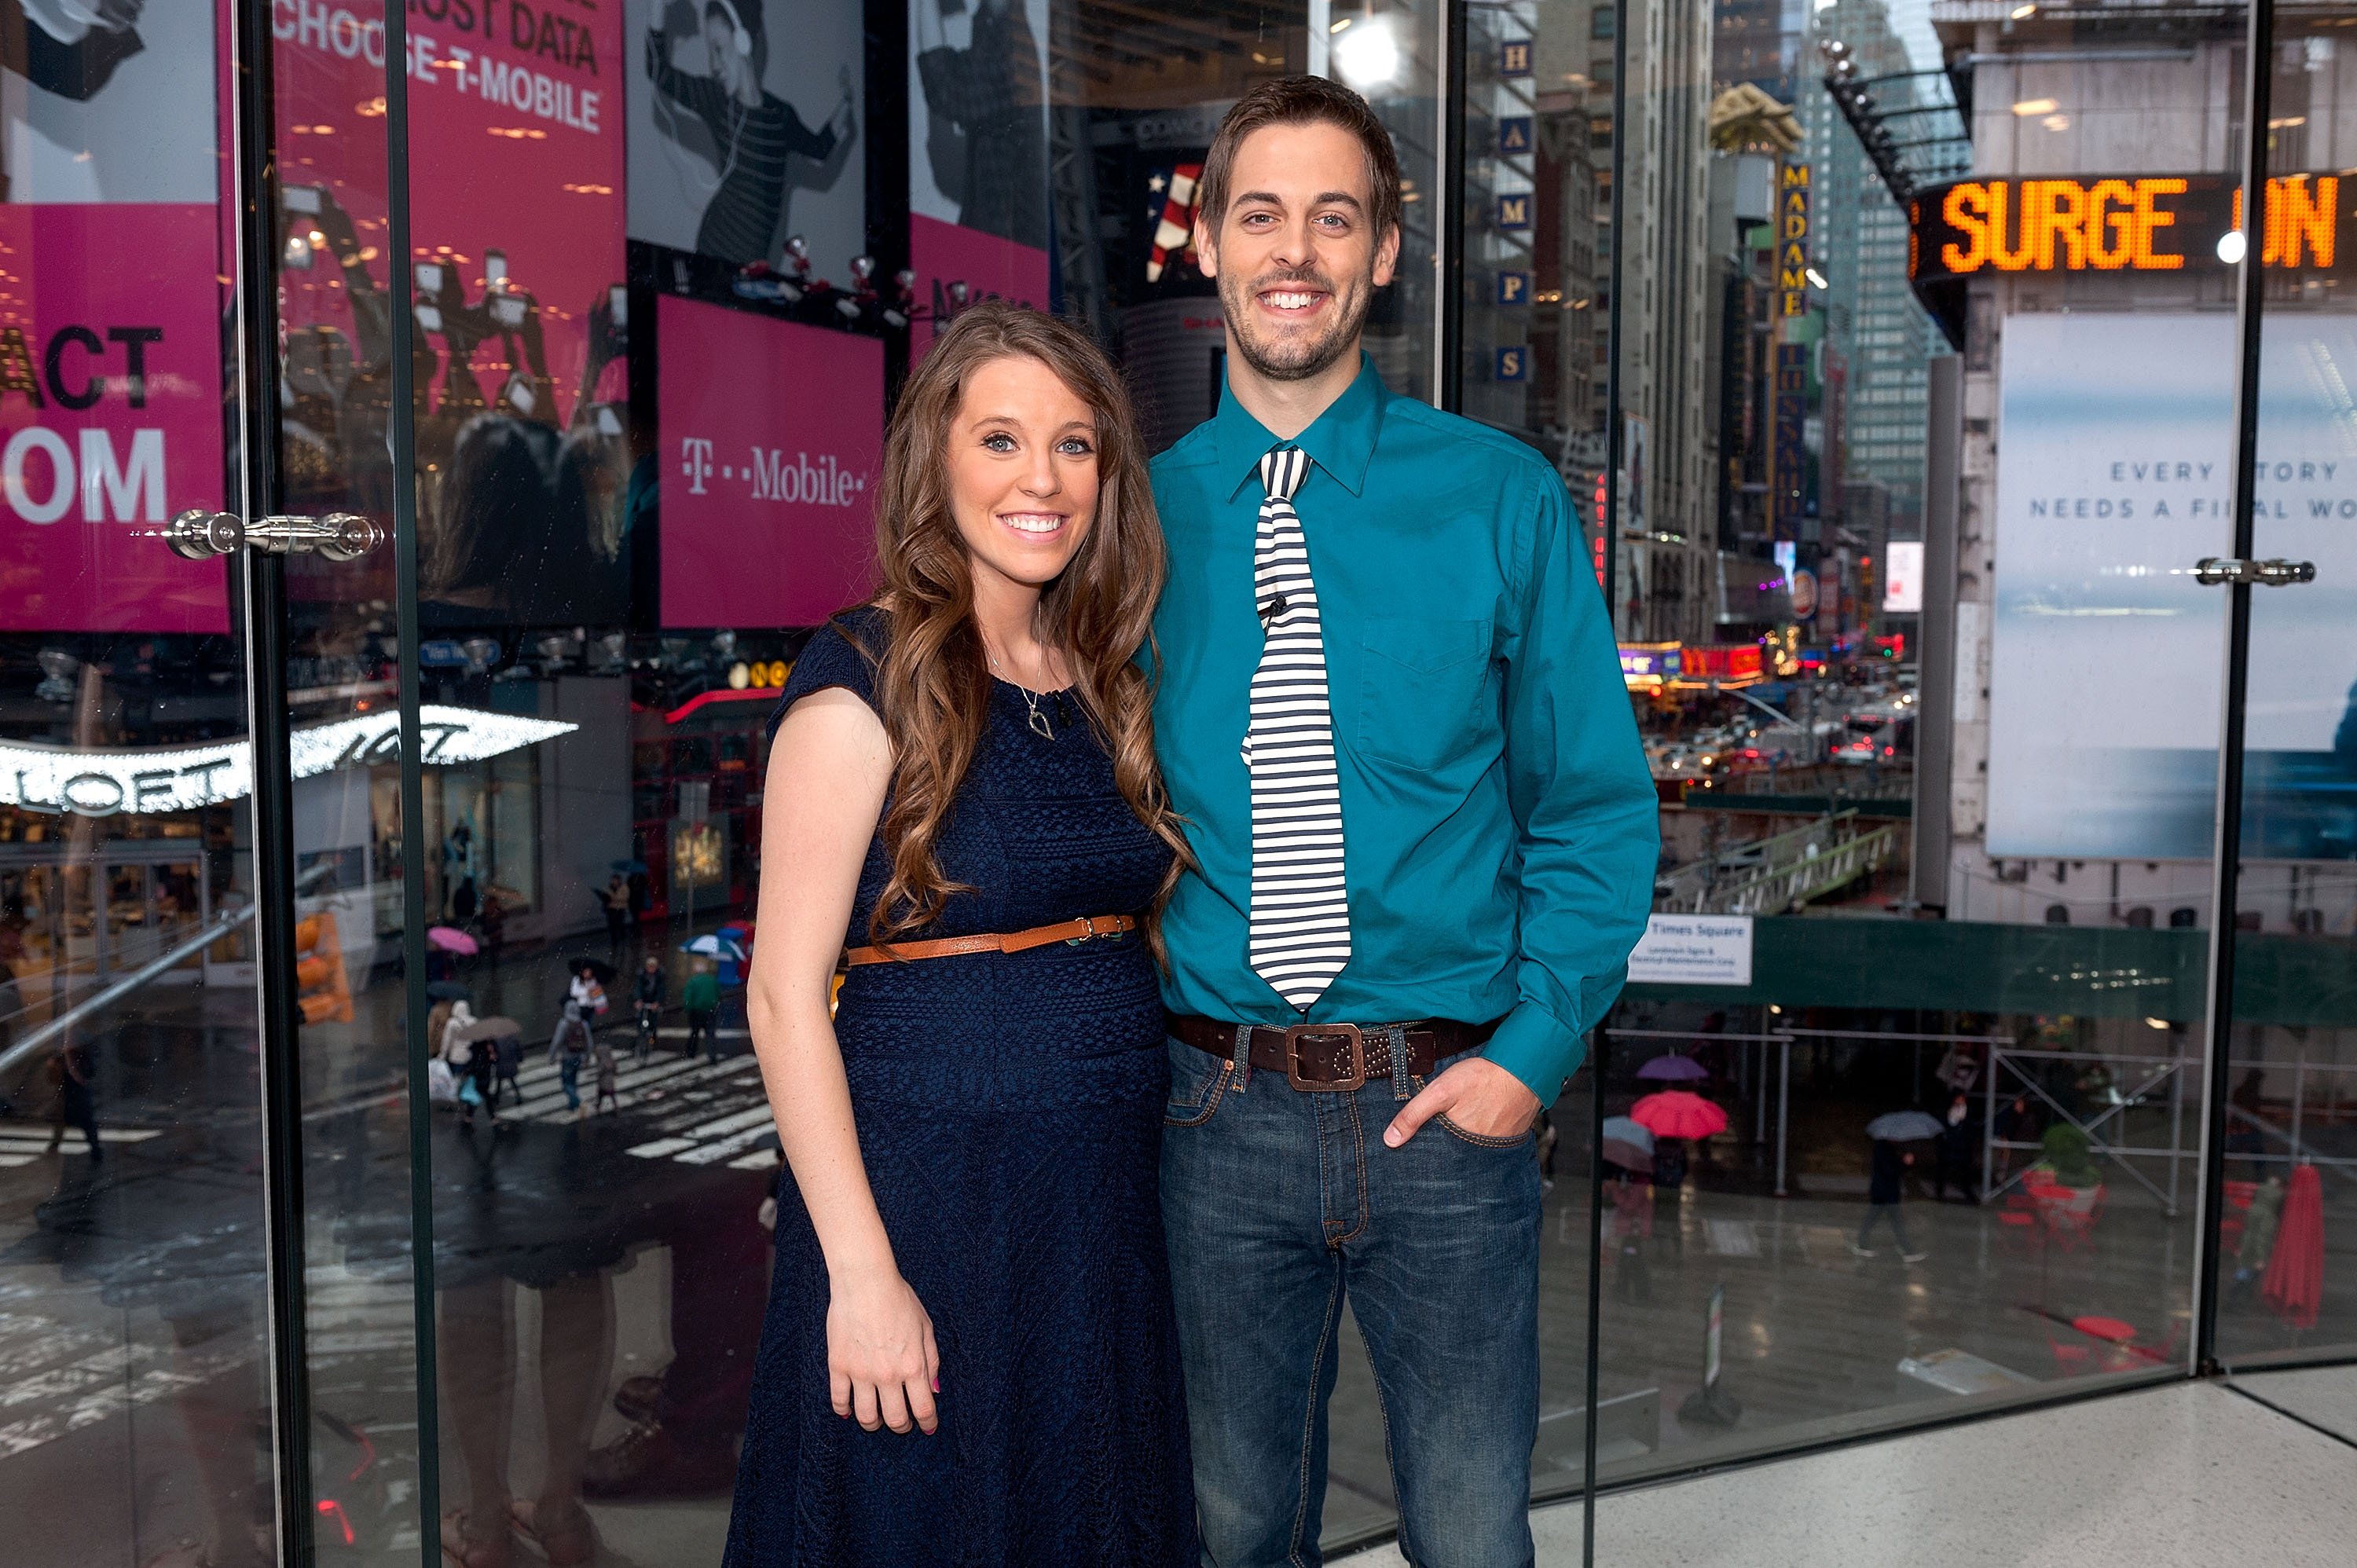 Jill Duggar and husband Derick Dillard visit the set of "Extra" in New York City in 2014. | Photo: Getty Images